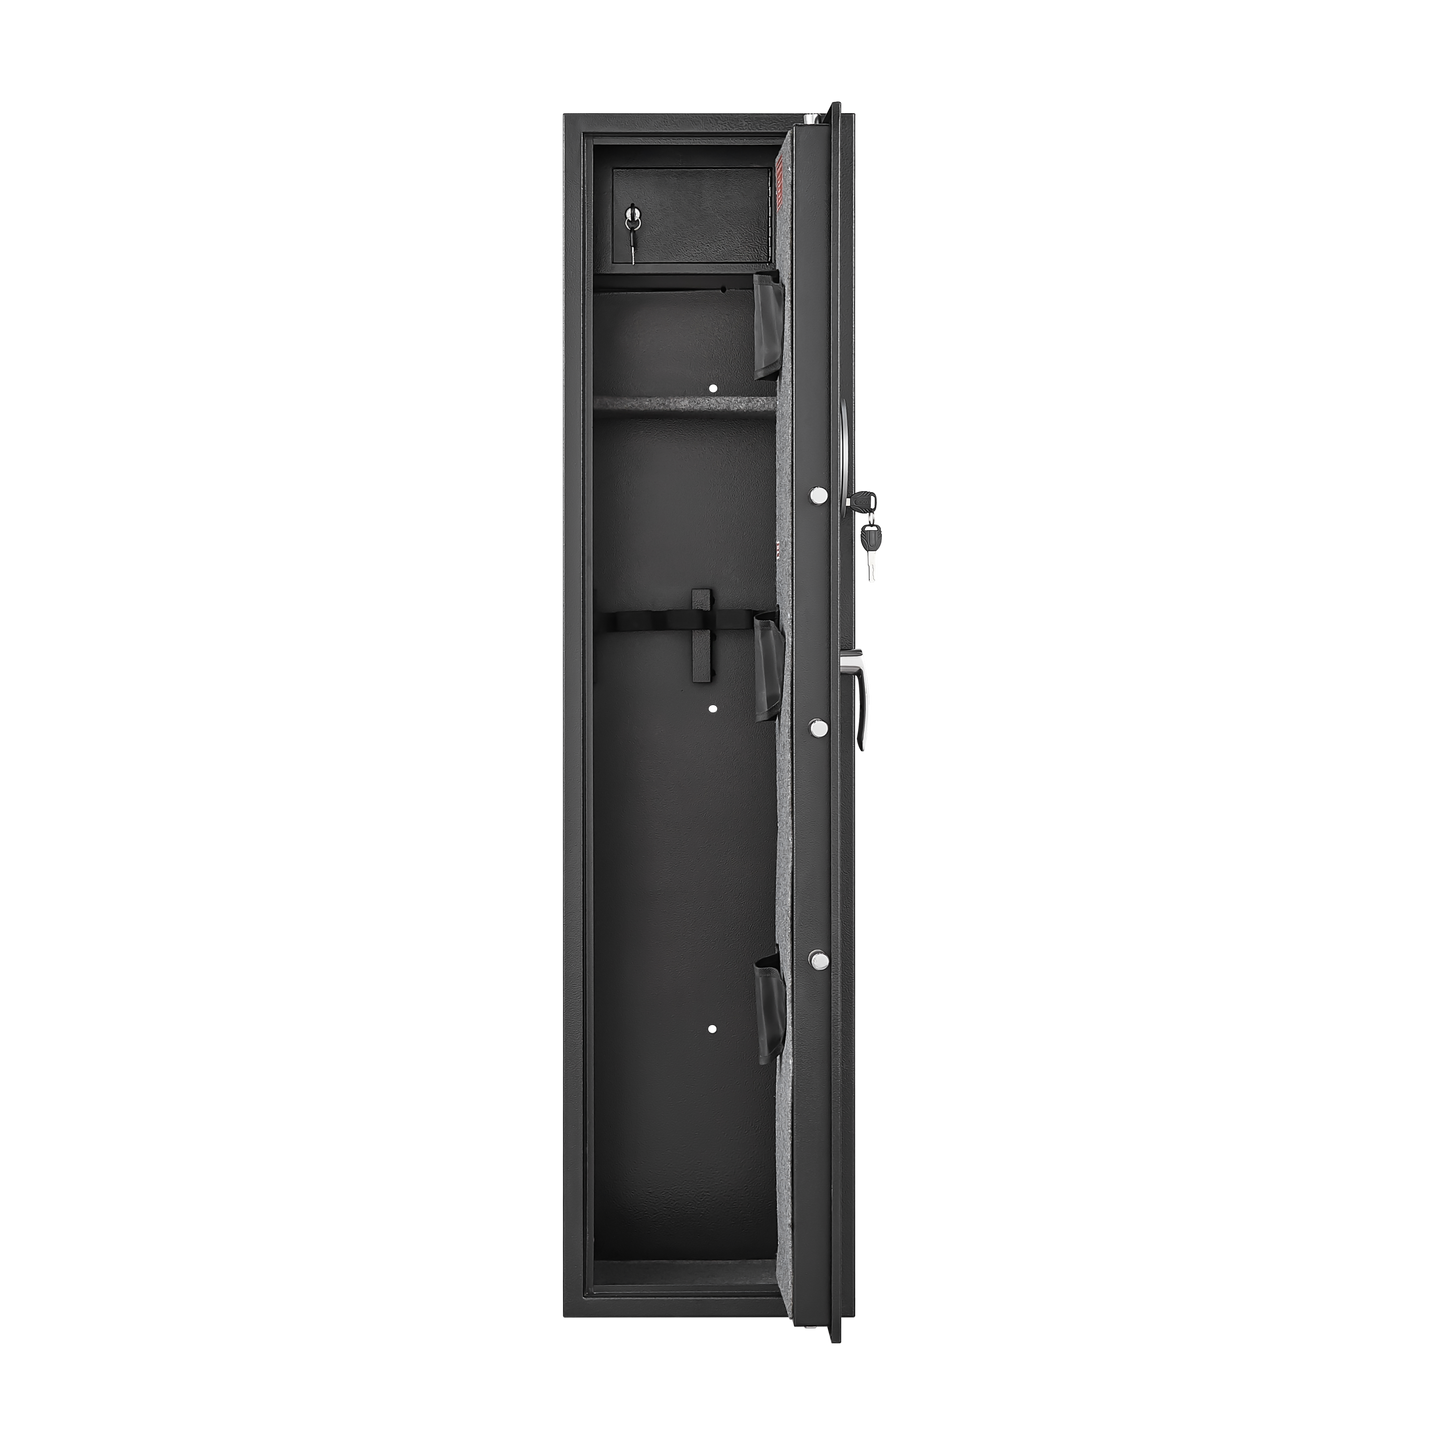 Secure Gun Cabinet with Password Lock: Stores 5 Rifles, 3 Pistols, and Includes Internal Storage Box and Magnetic Light